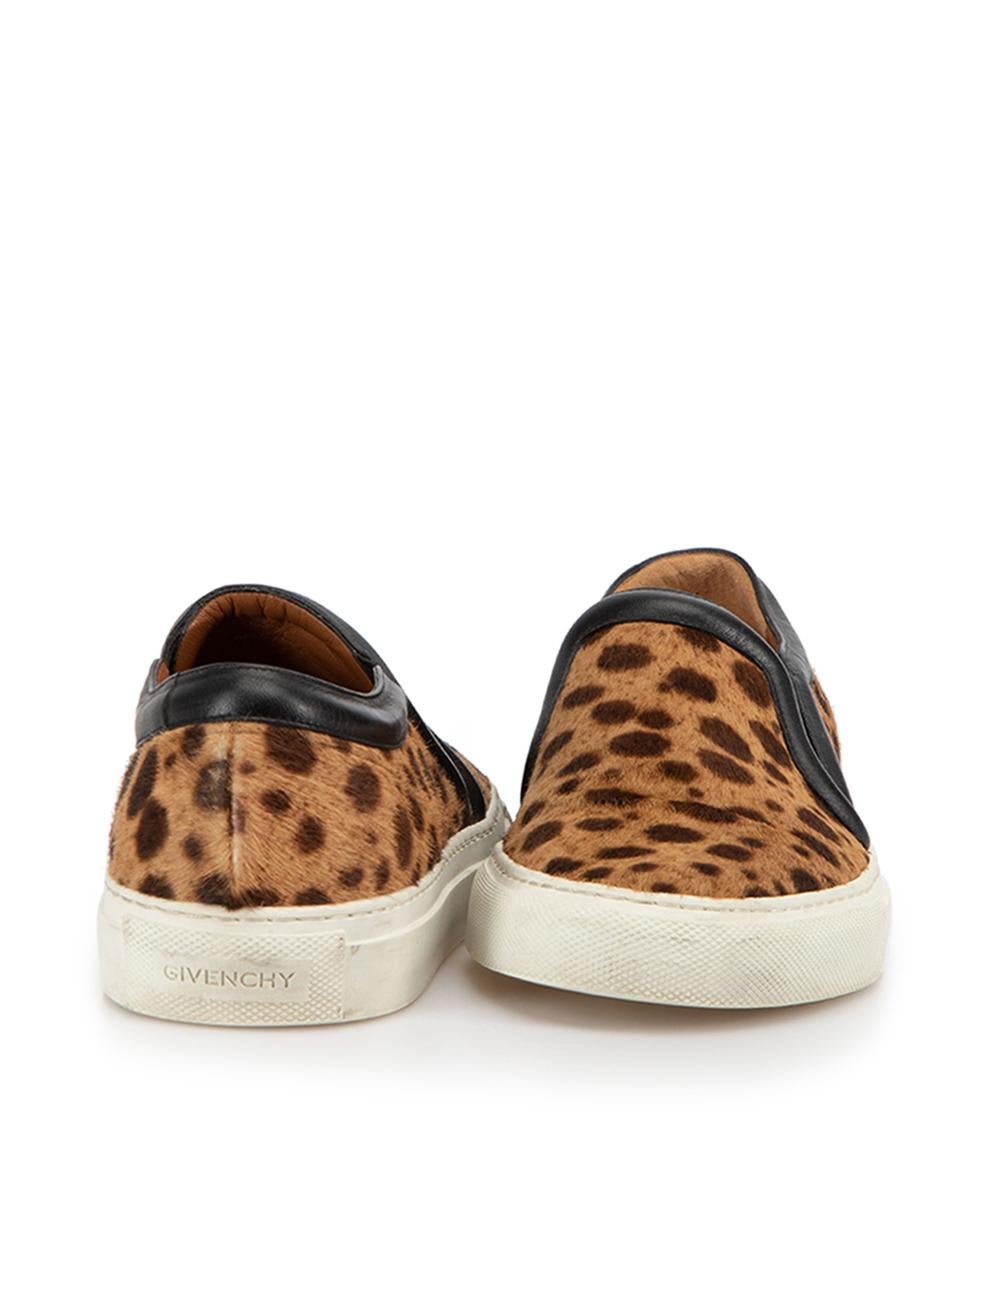 Givenchy Women's Brown Pony Hair Animal Print Trainers In Good Condition For Sale In London, GB